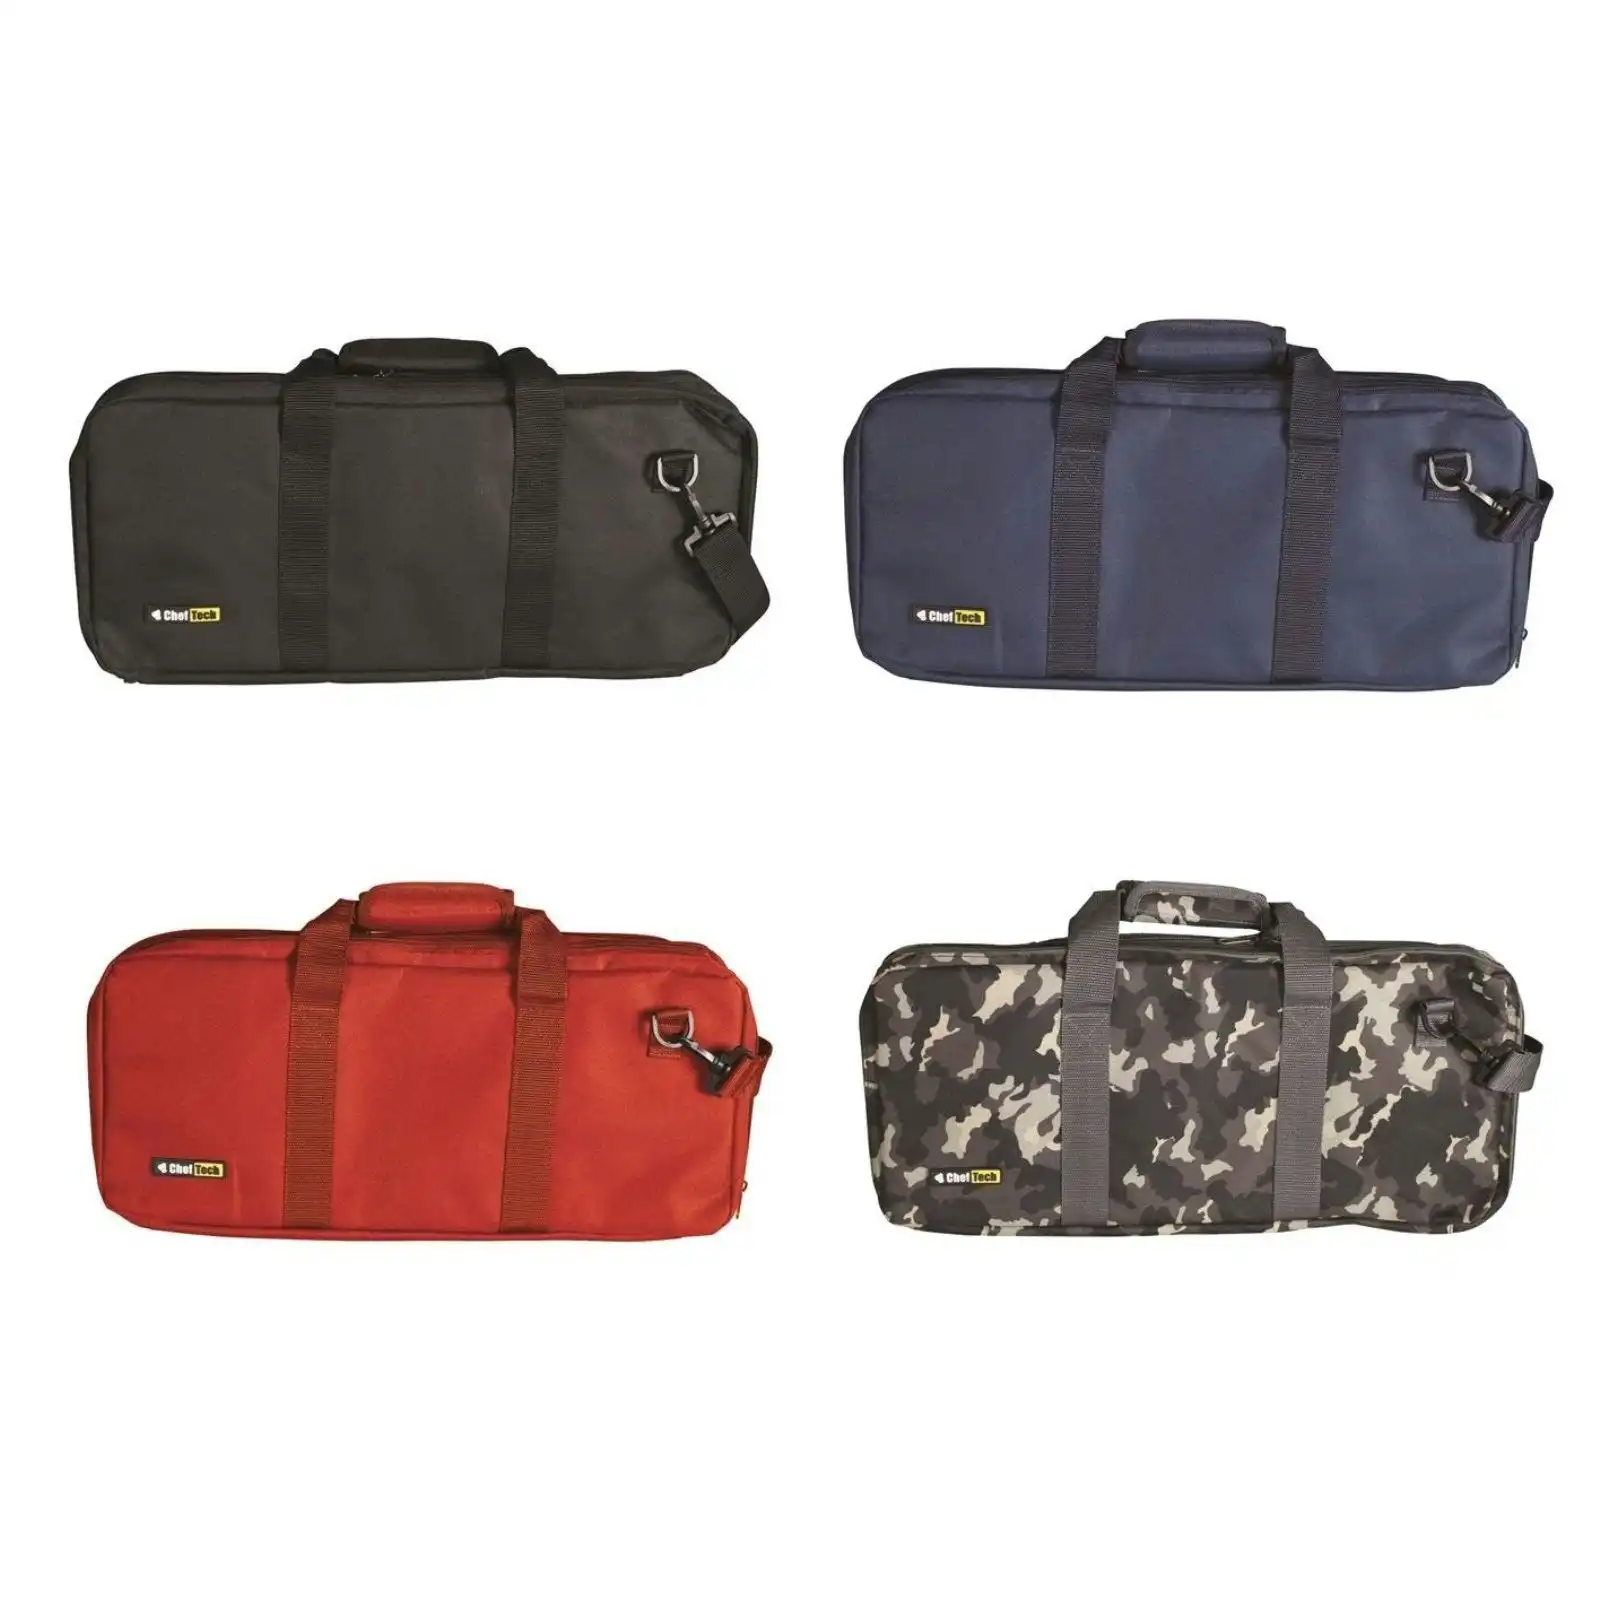 Cheftech 18 Piece Knife Roll Bag   Red, Black Blue Or Camo